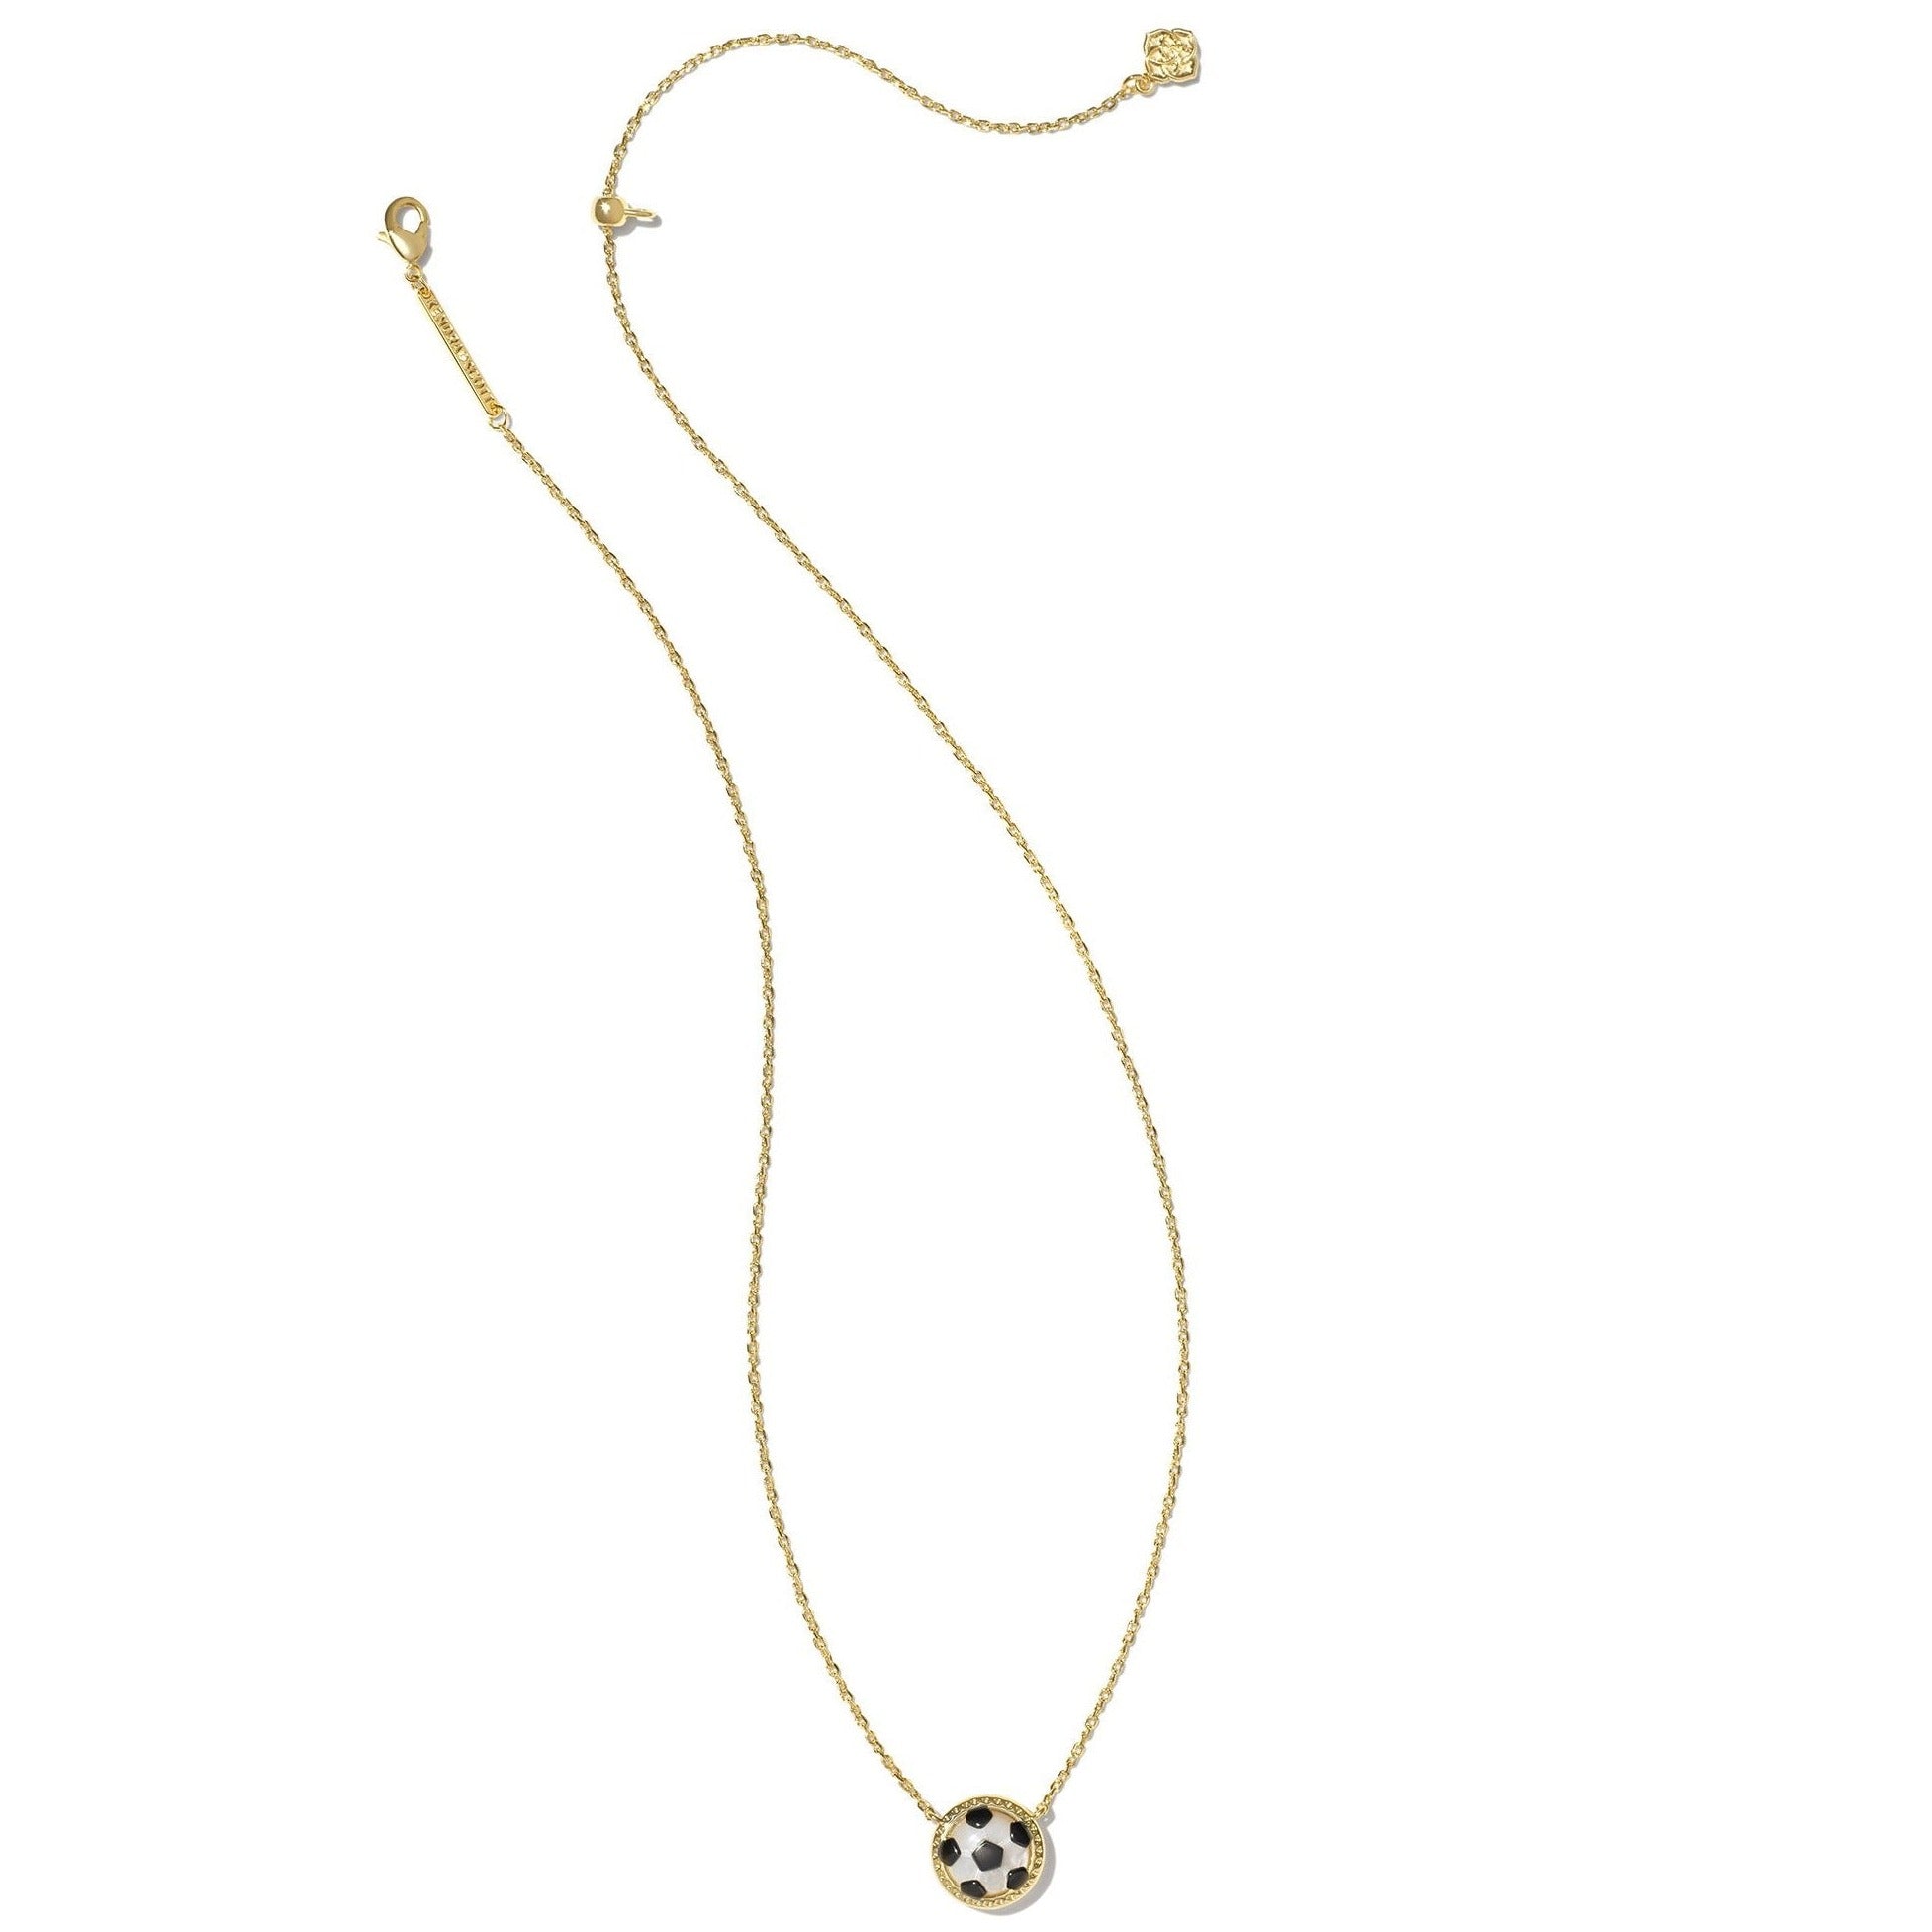 Kendra Scott | Soccer Gold Short Pendant Necklace in Ivory Mother-of-Pearl - Giddy Up Glamour Boutique